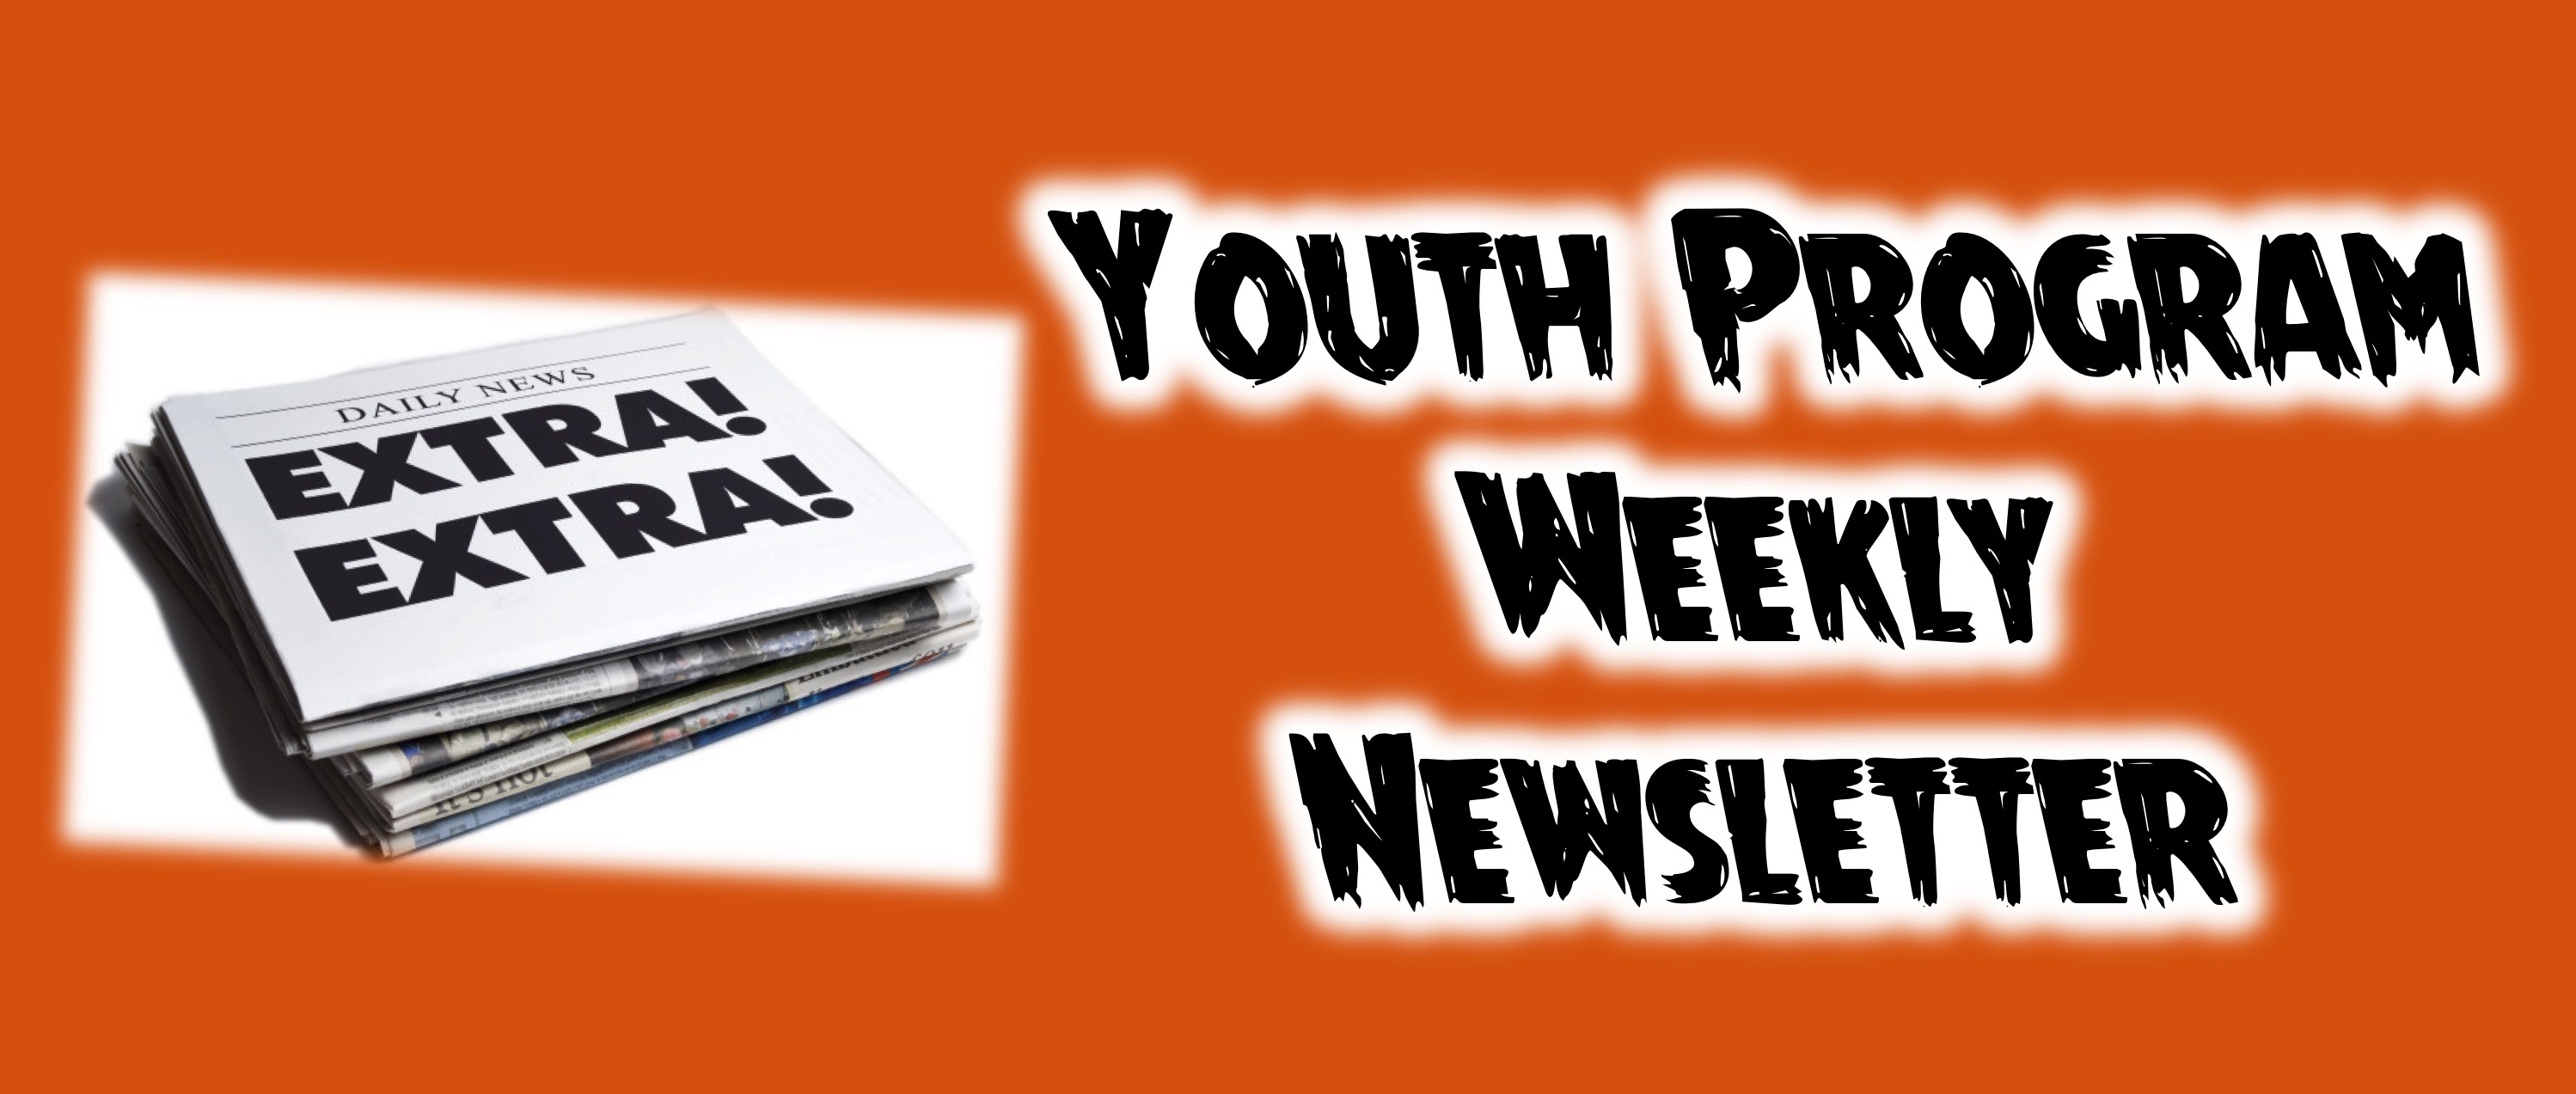 Youth Program Weekly Newsletter